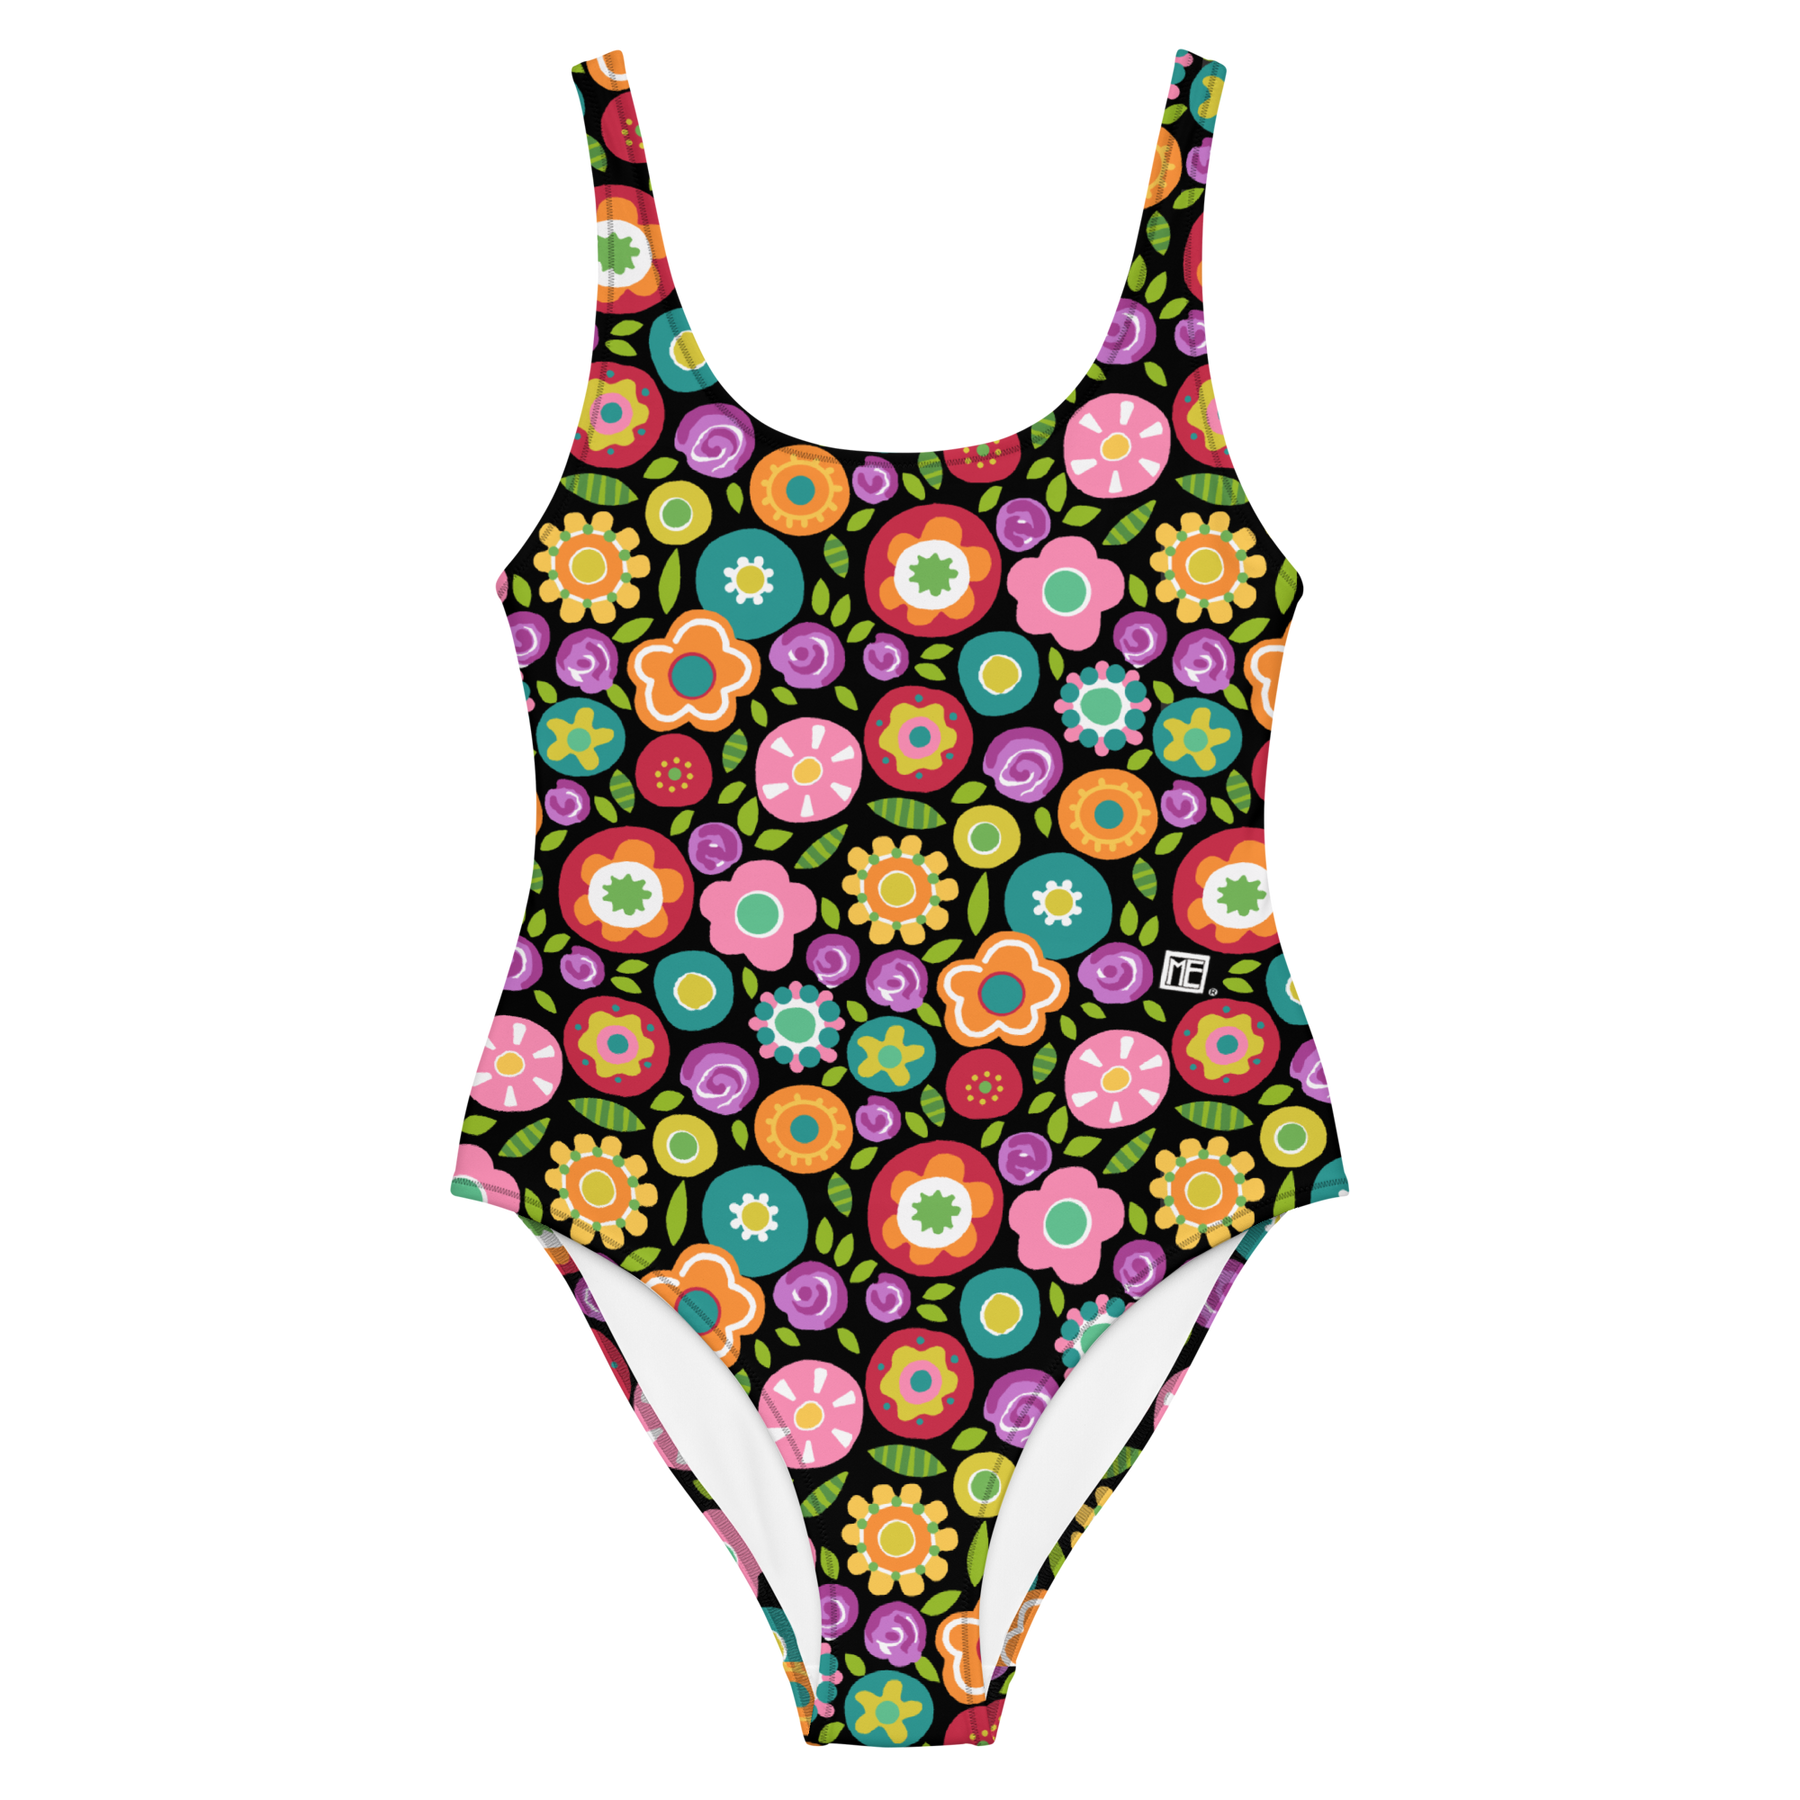 Rainbow Floral One-Piece Swimsuit